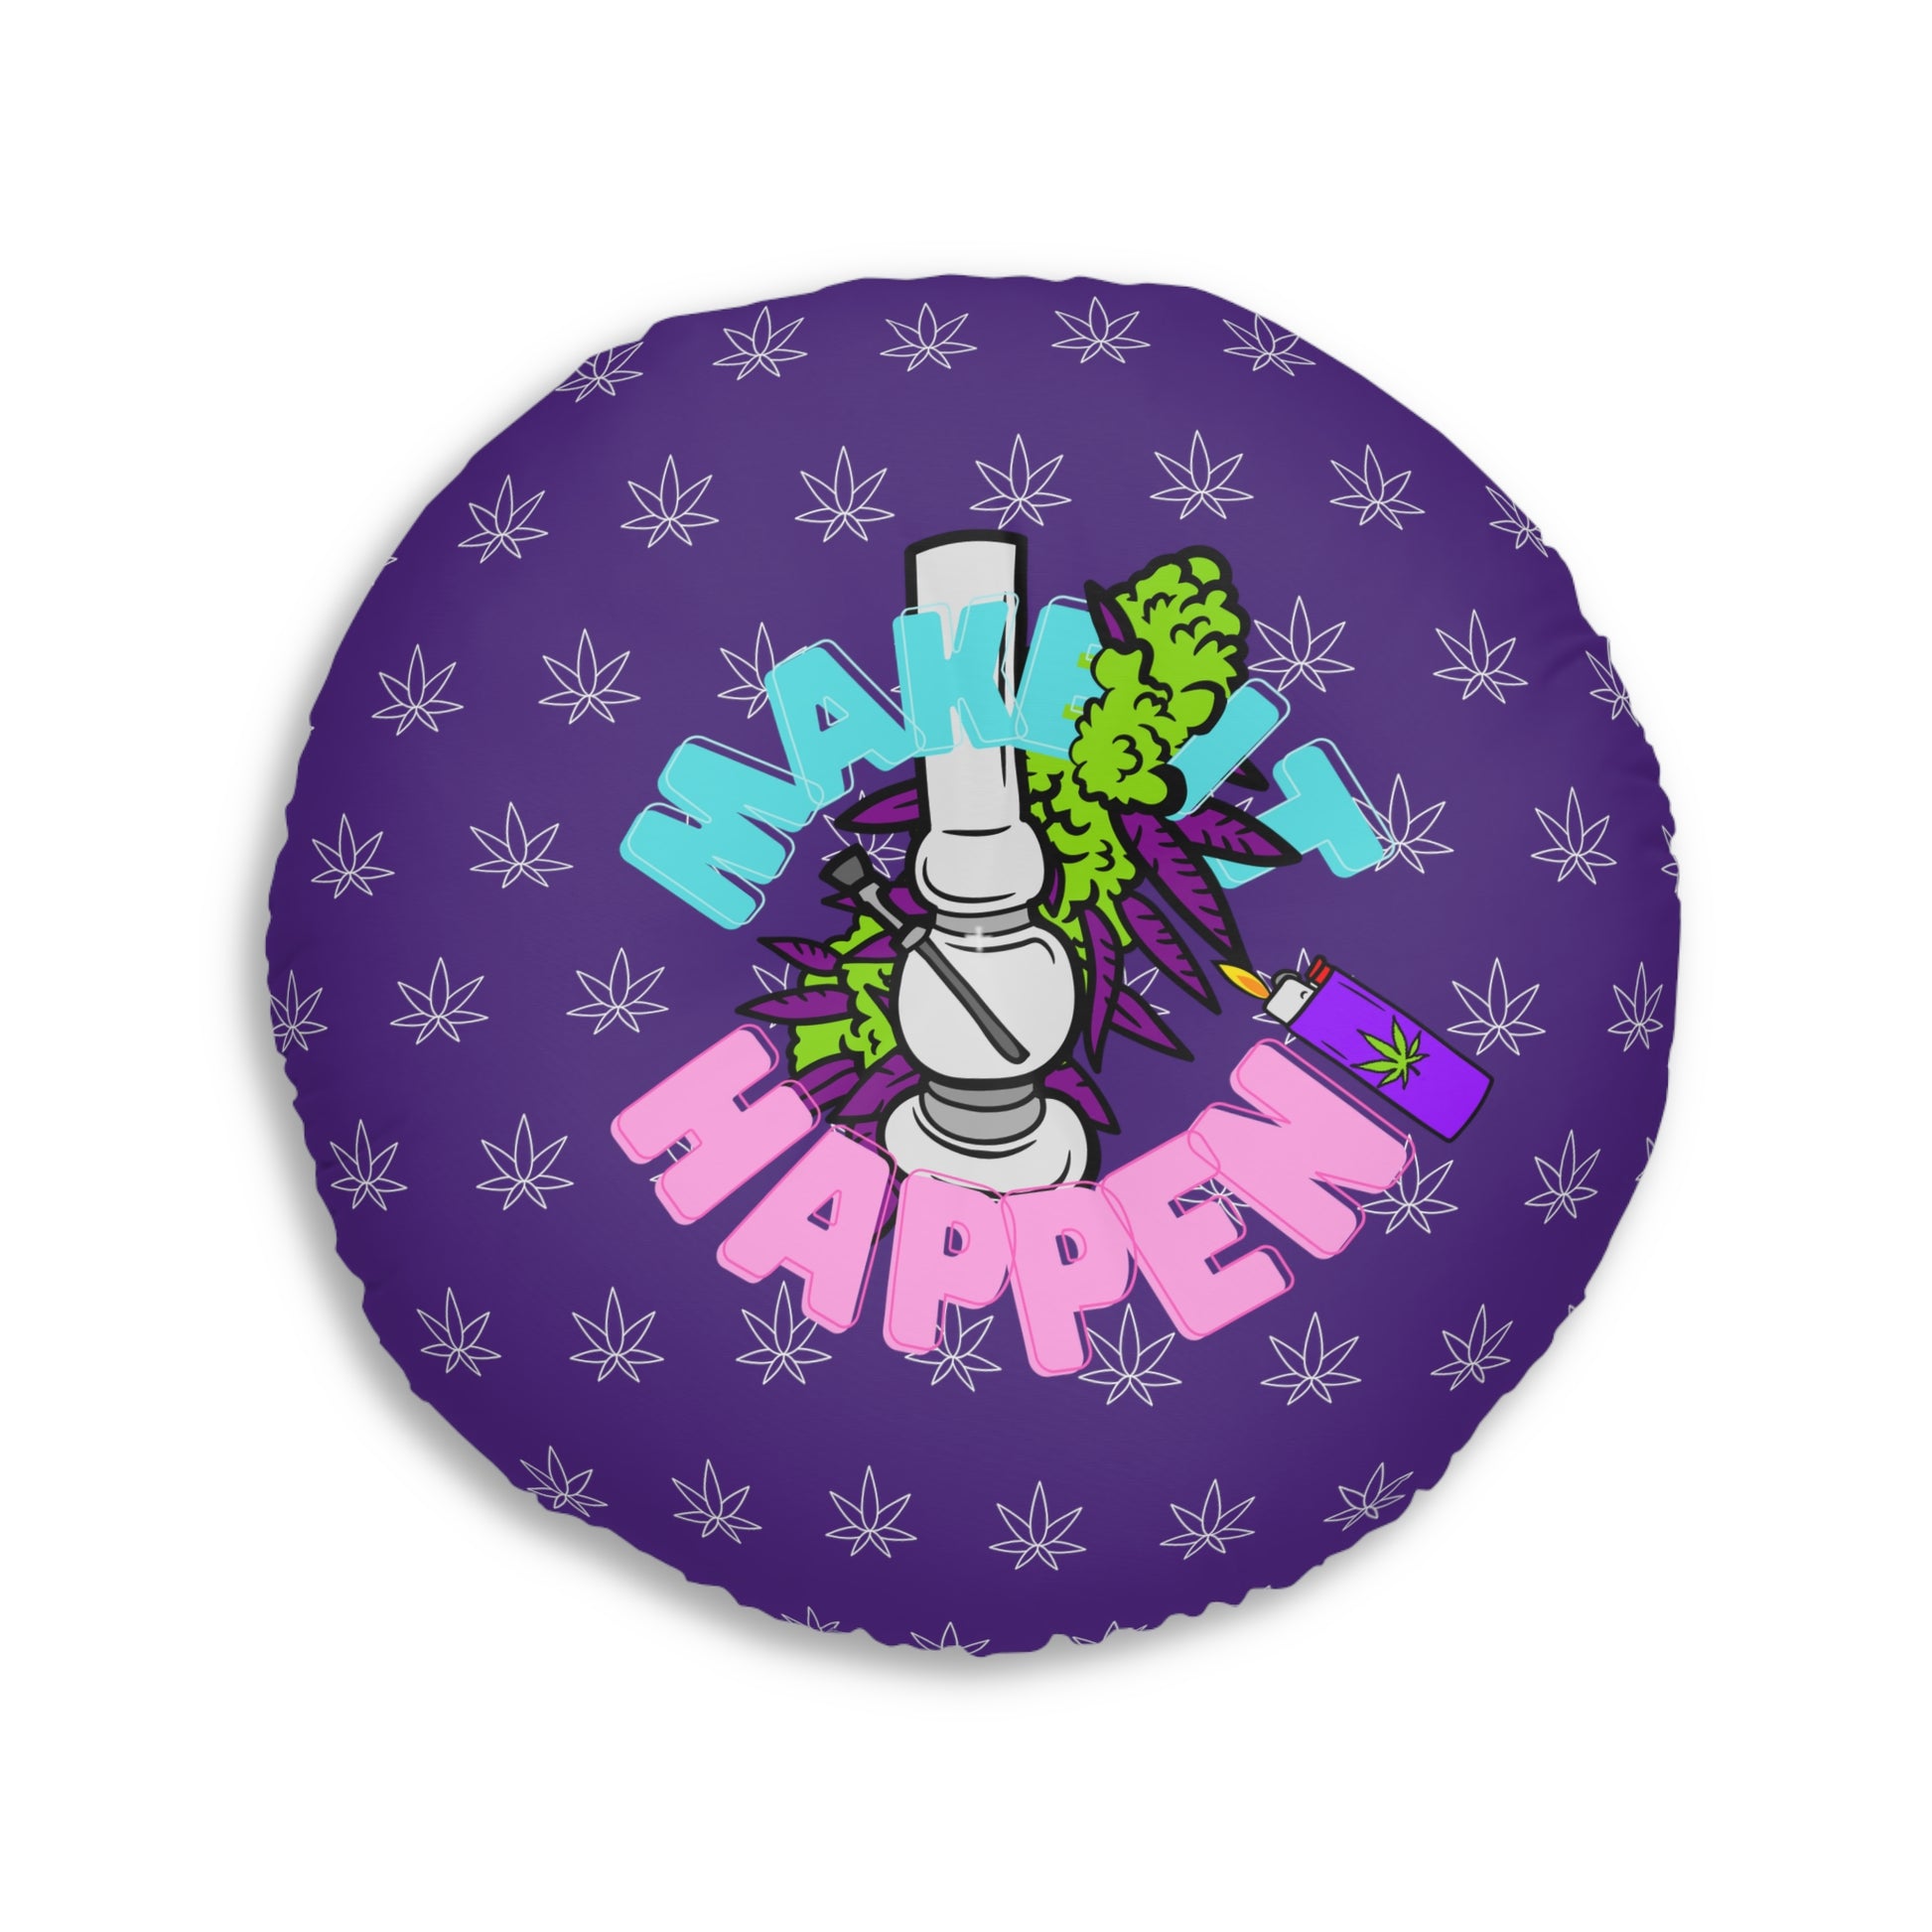 Round tufted floor pillow with a purple background featuring a cartoon-style design of a Make It Happen Cannabis, Bong, & Lighter and text "make it happen" surrounded by star patterns.